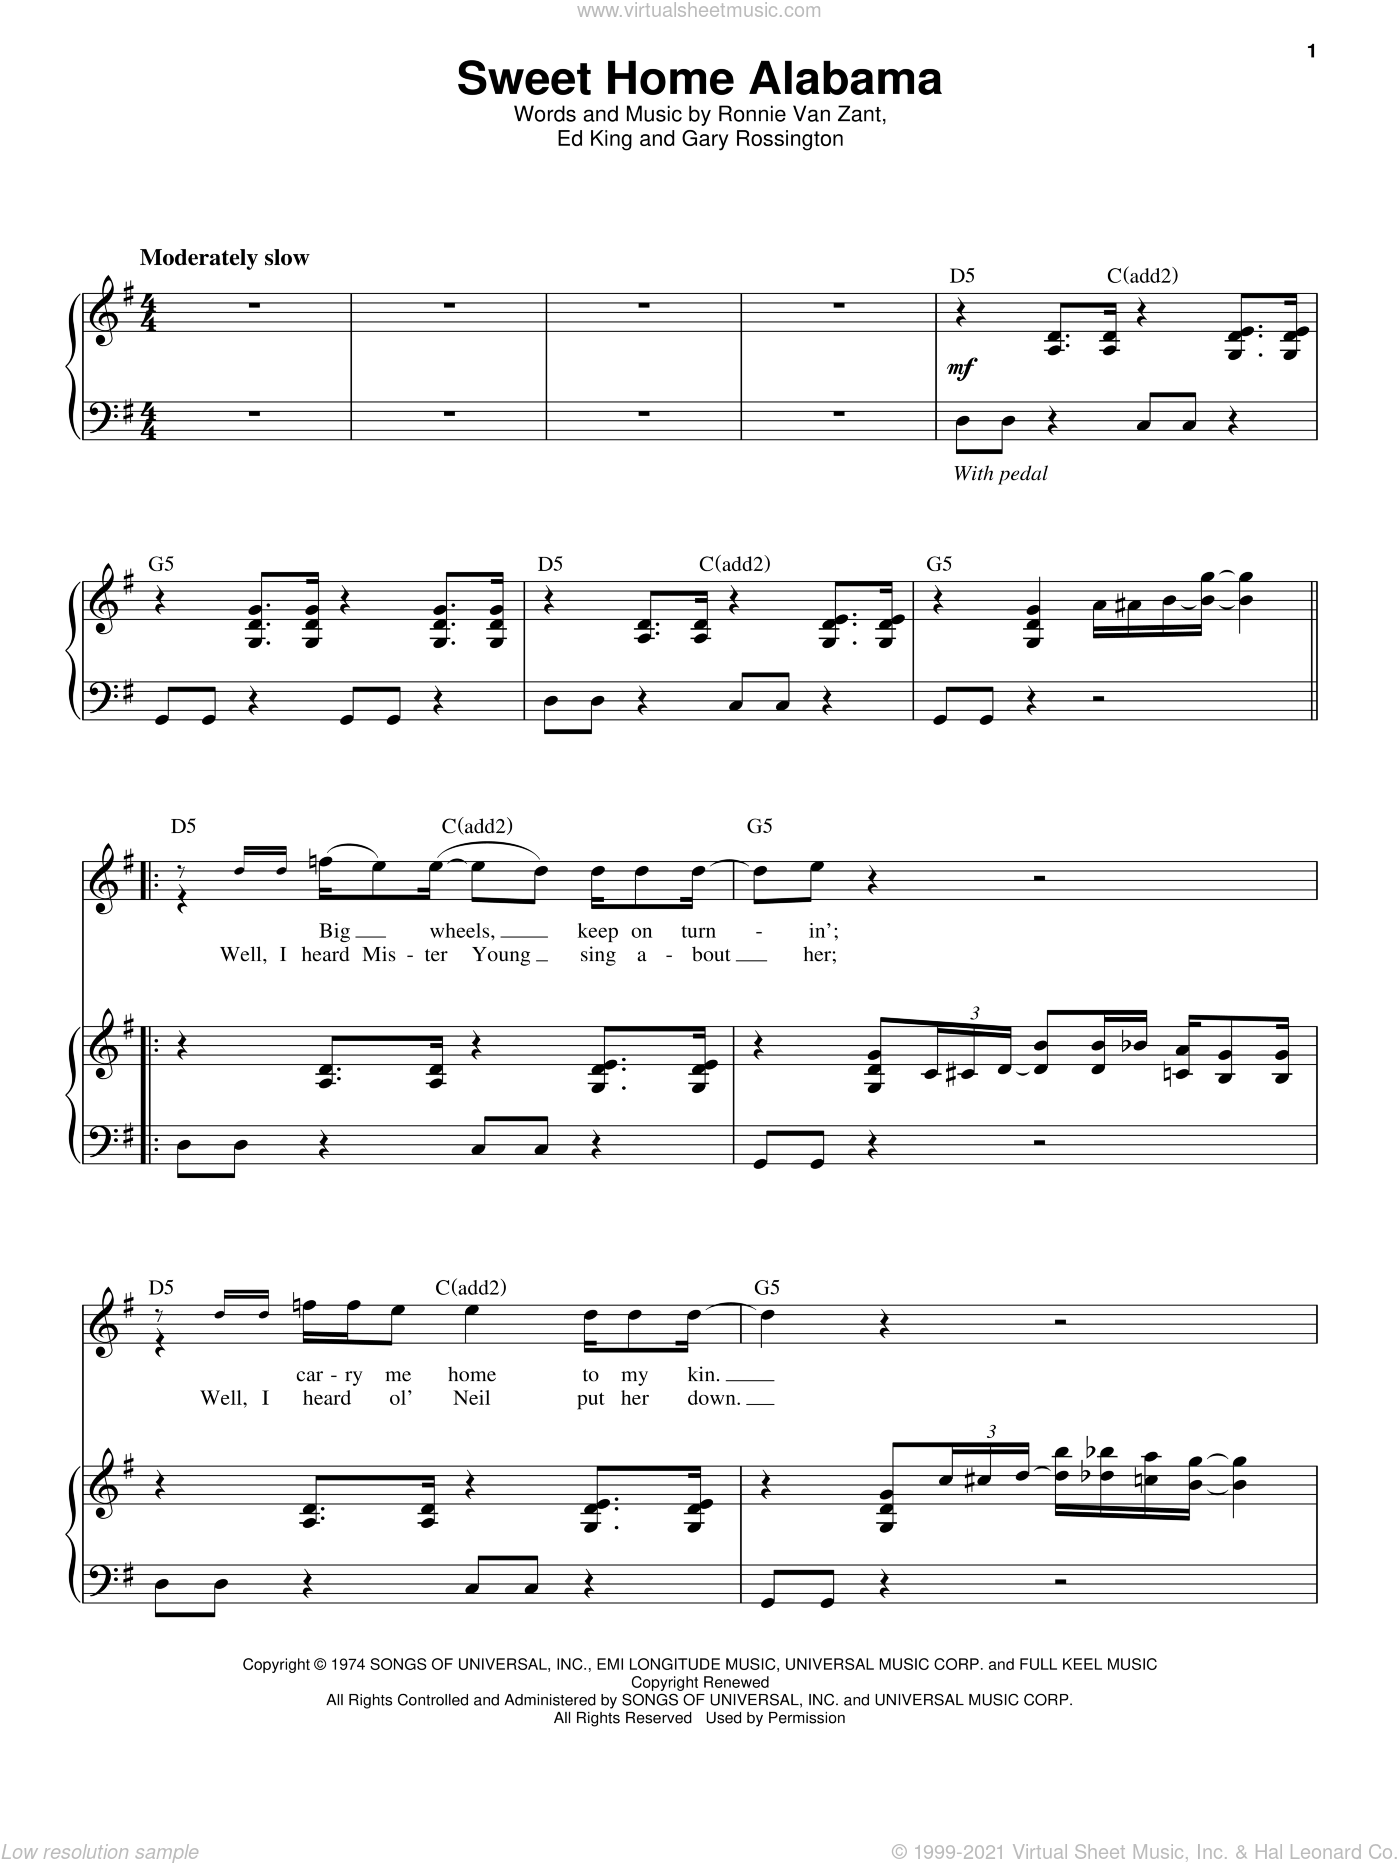 Sweet Home Alabama for voice and piano.